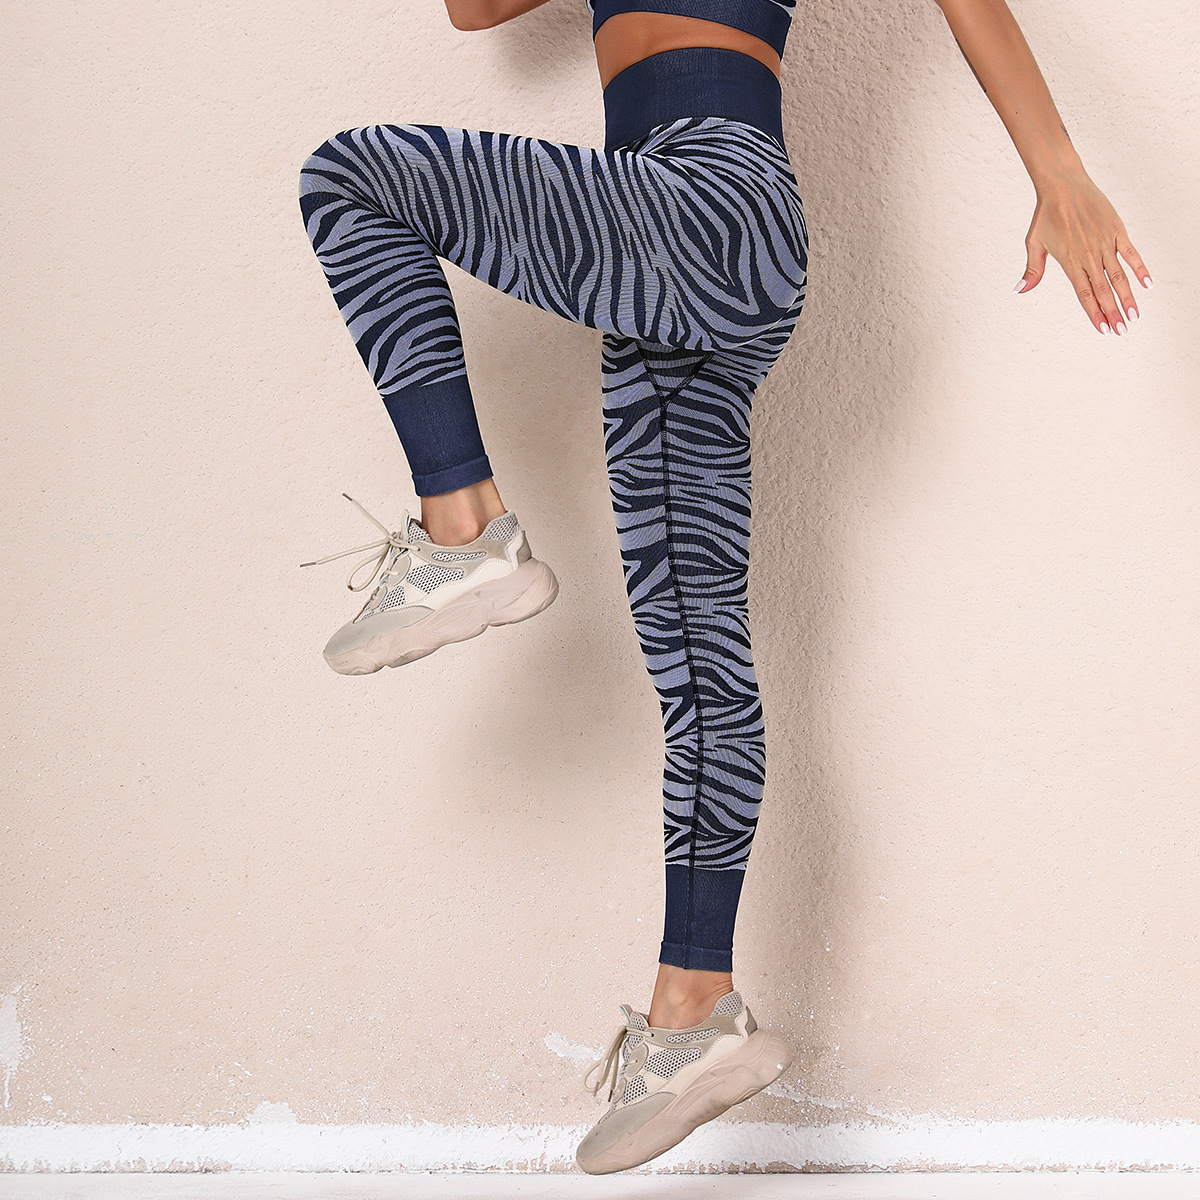 https://www.fitness-tool.com/wholesale-seamless-stripe-colorblock-yoga-pants-stay-ahead-in-the-global-fitness-market-zhihui-product